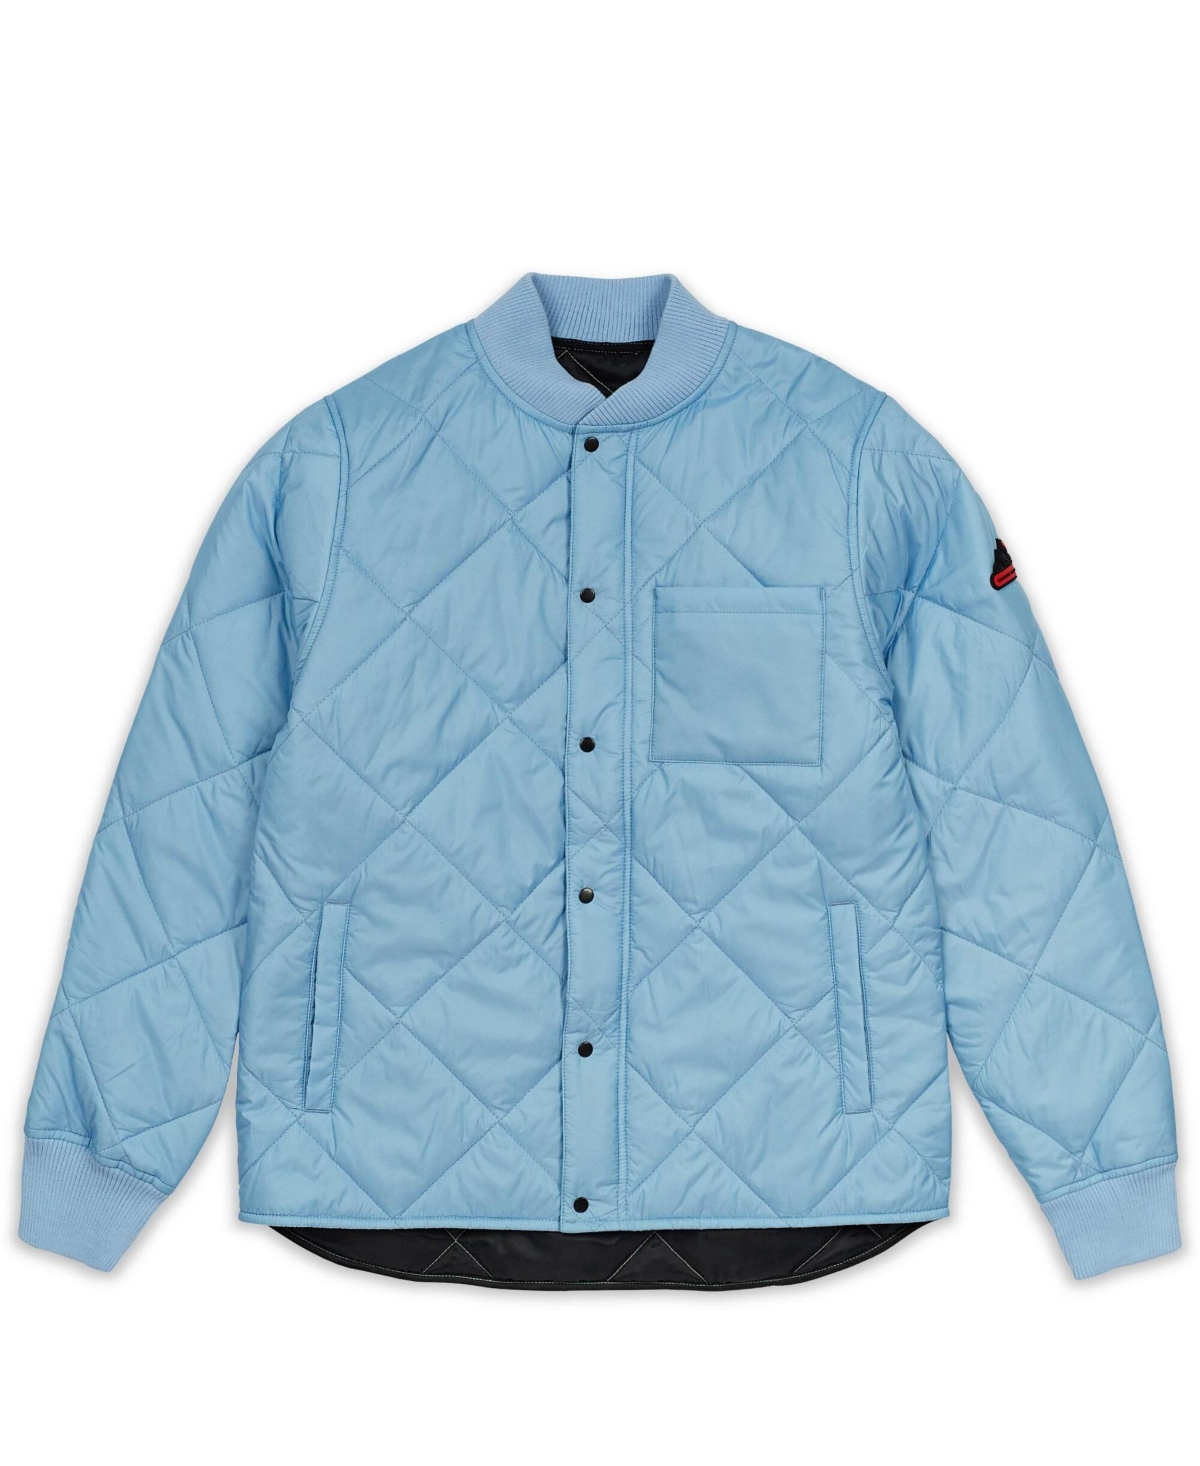 Men's Quilted Shirt Jacket - Icy Blue